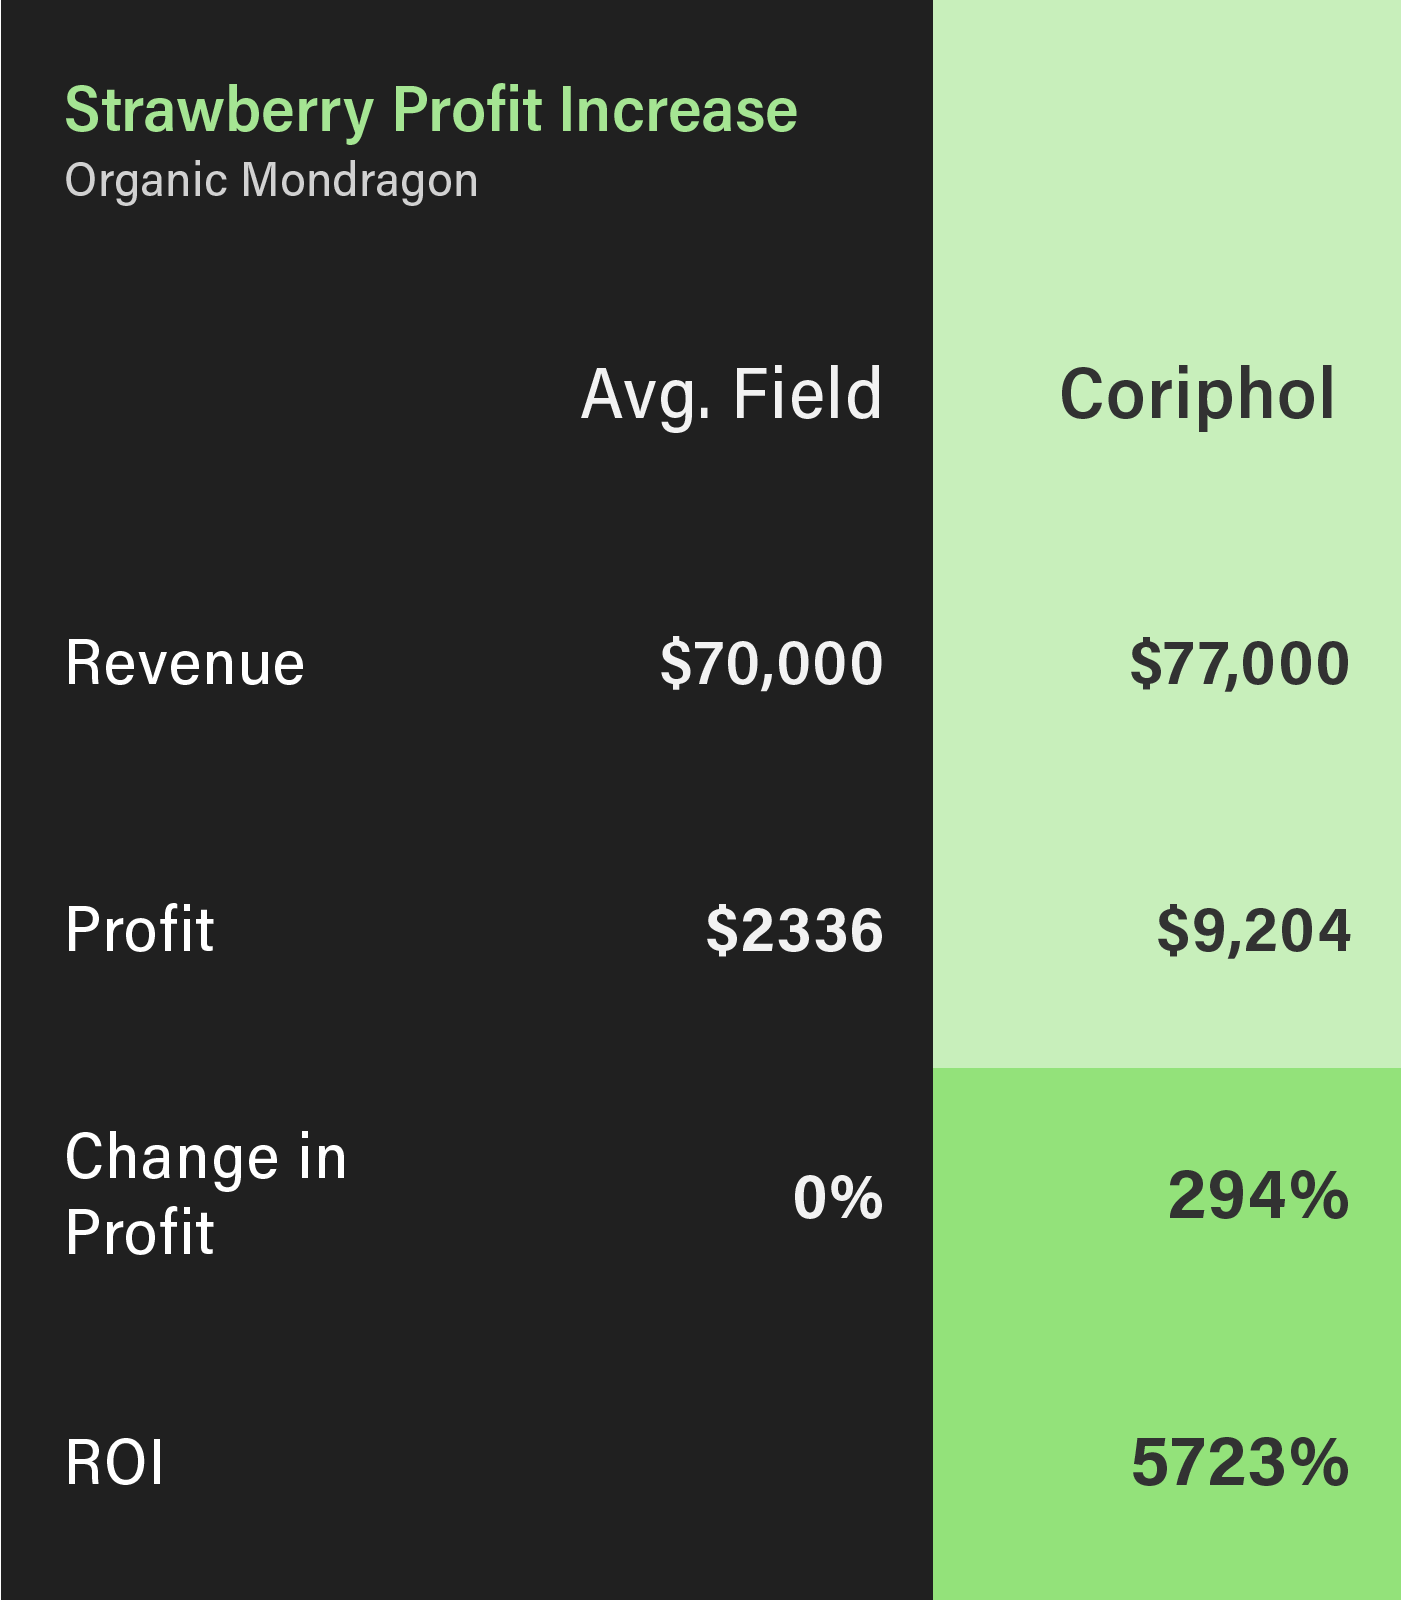 Table of profit increases in farming of organic Mondragon Strawberries with Coriphol.